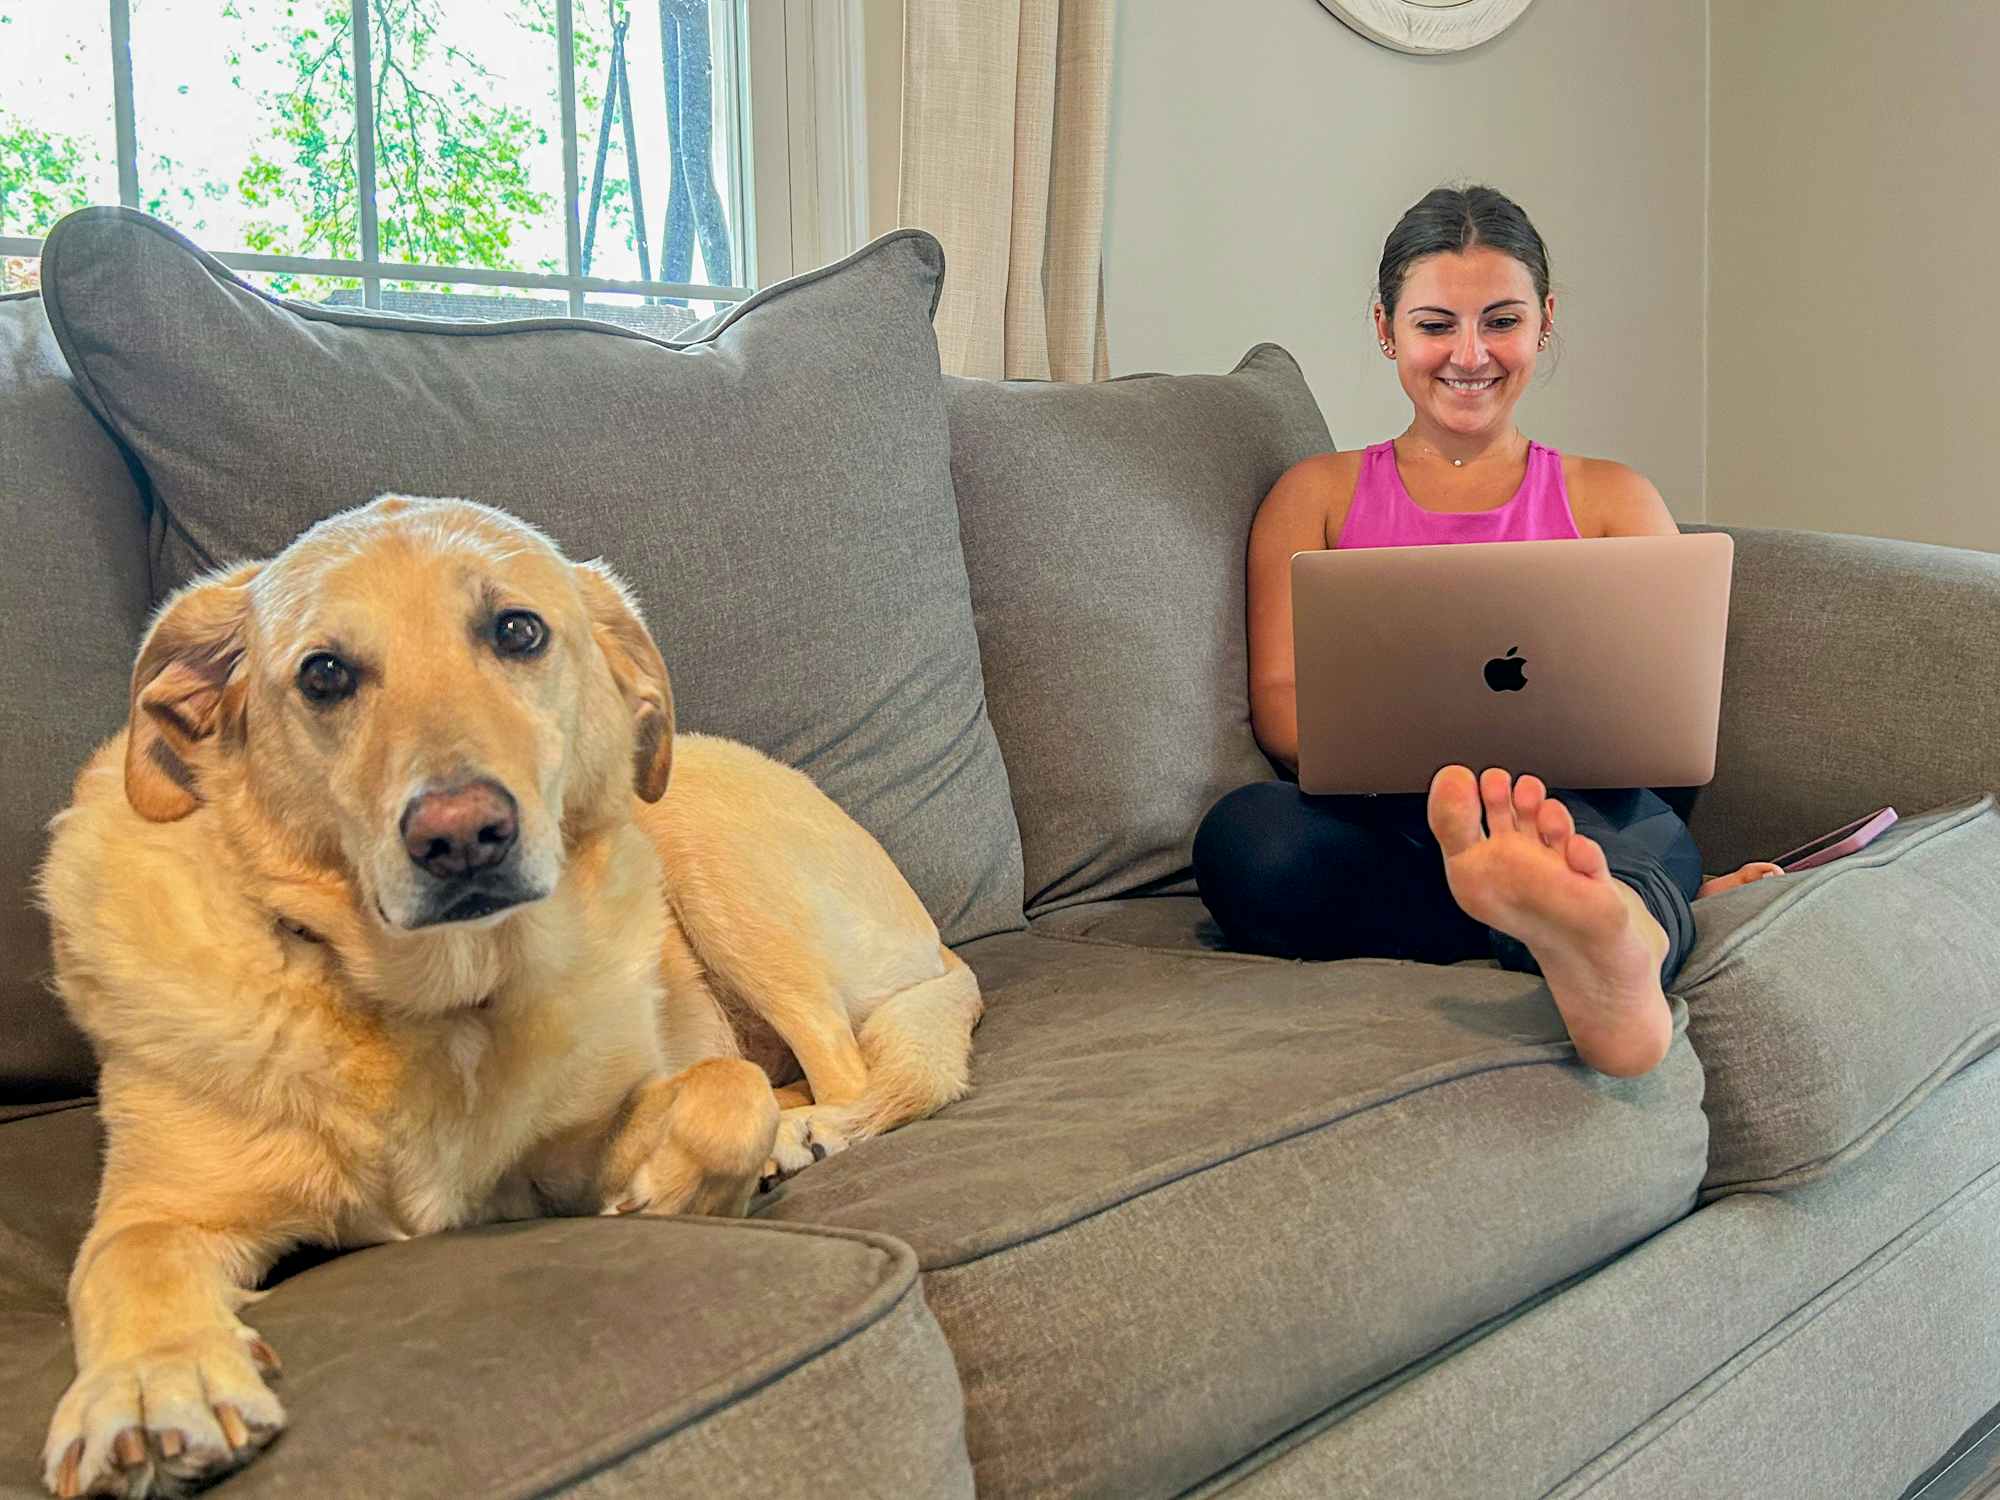 a person holding a macbook while sitting on a couch with a dog